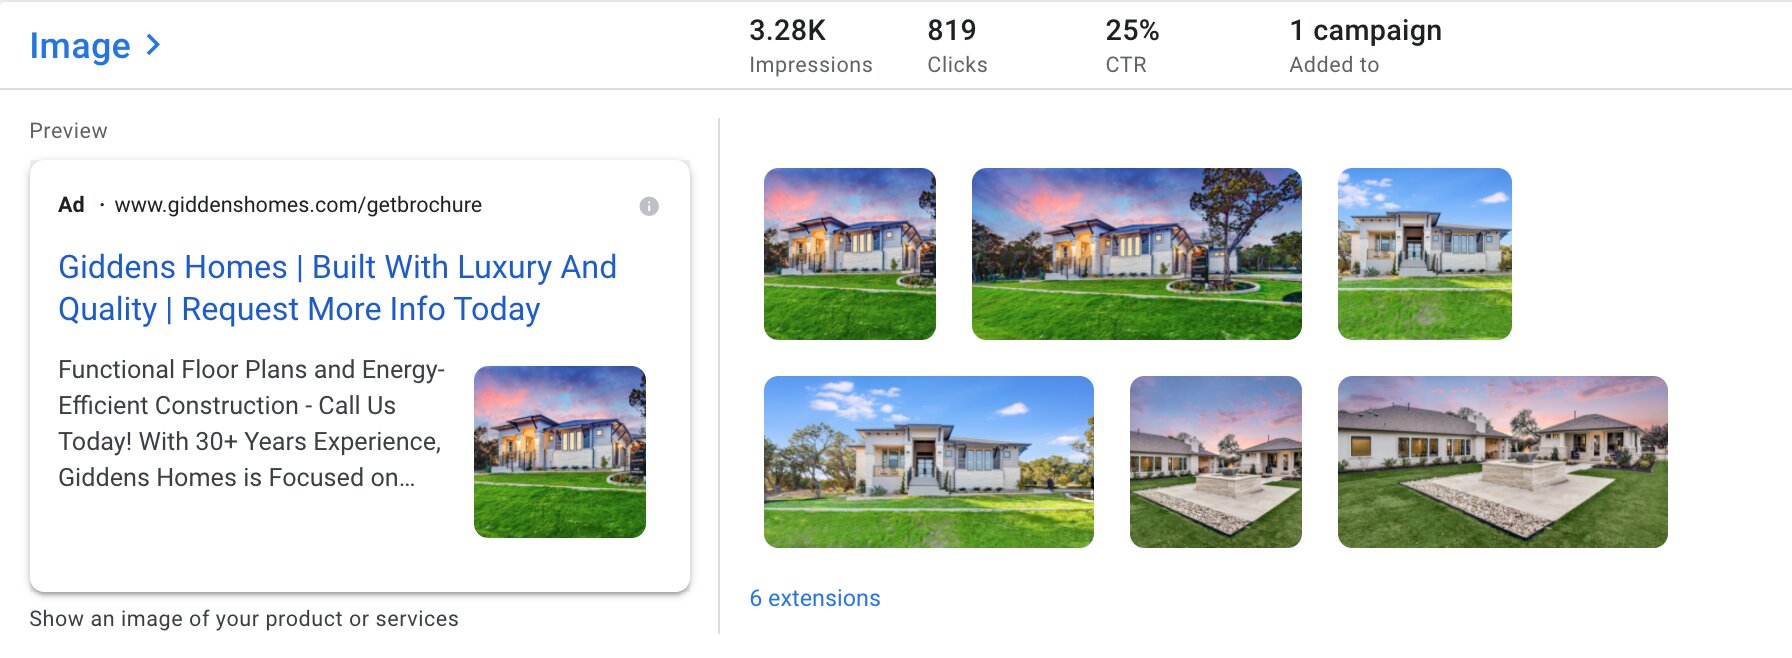 Google Ads Image Extensions for Homebuilders